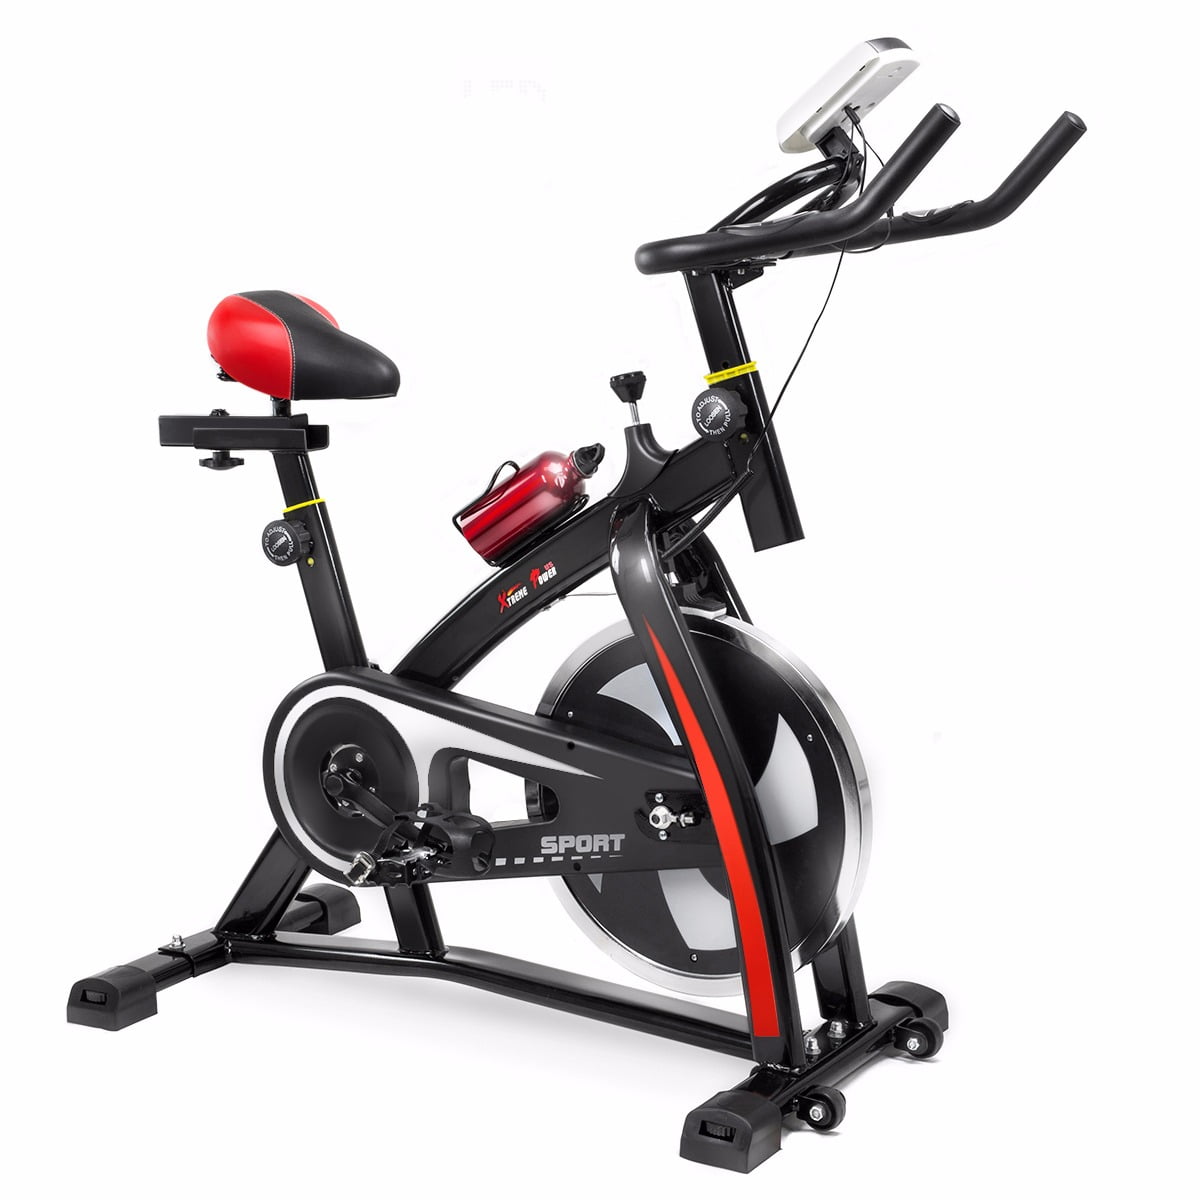 Details about   ☀Bicycle Cycling Fitness Gym Exercise Stationary Bike Cardio Workout Home Indoor 